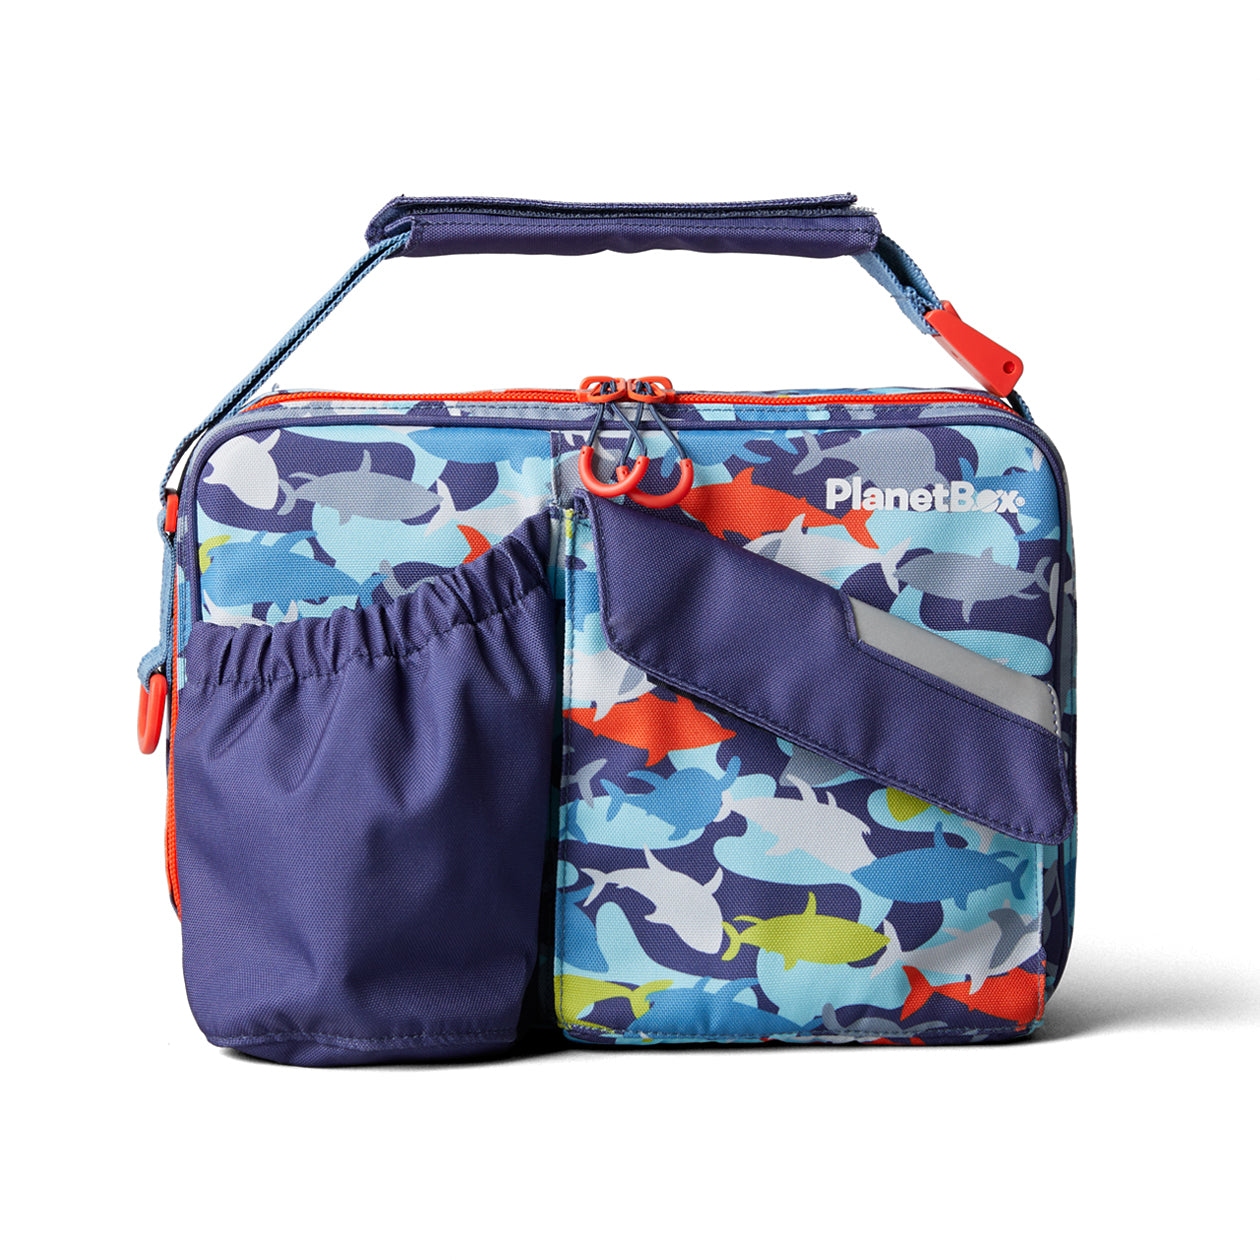 PlanetBox Insulated Carry Bag for Rover or Launch: Camo Sharks